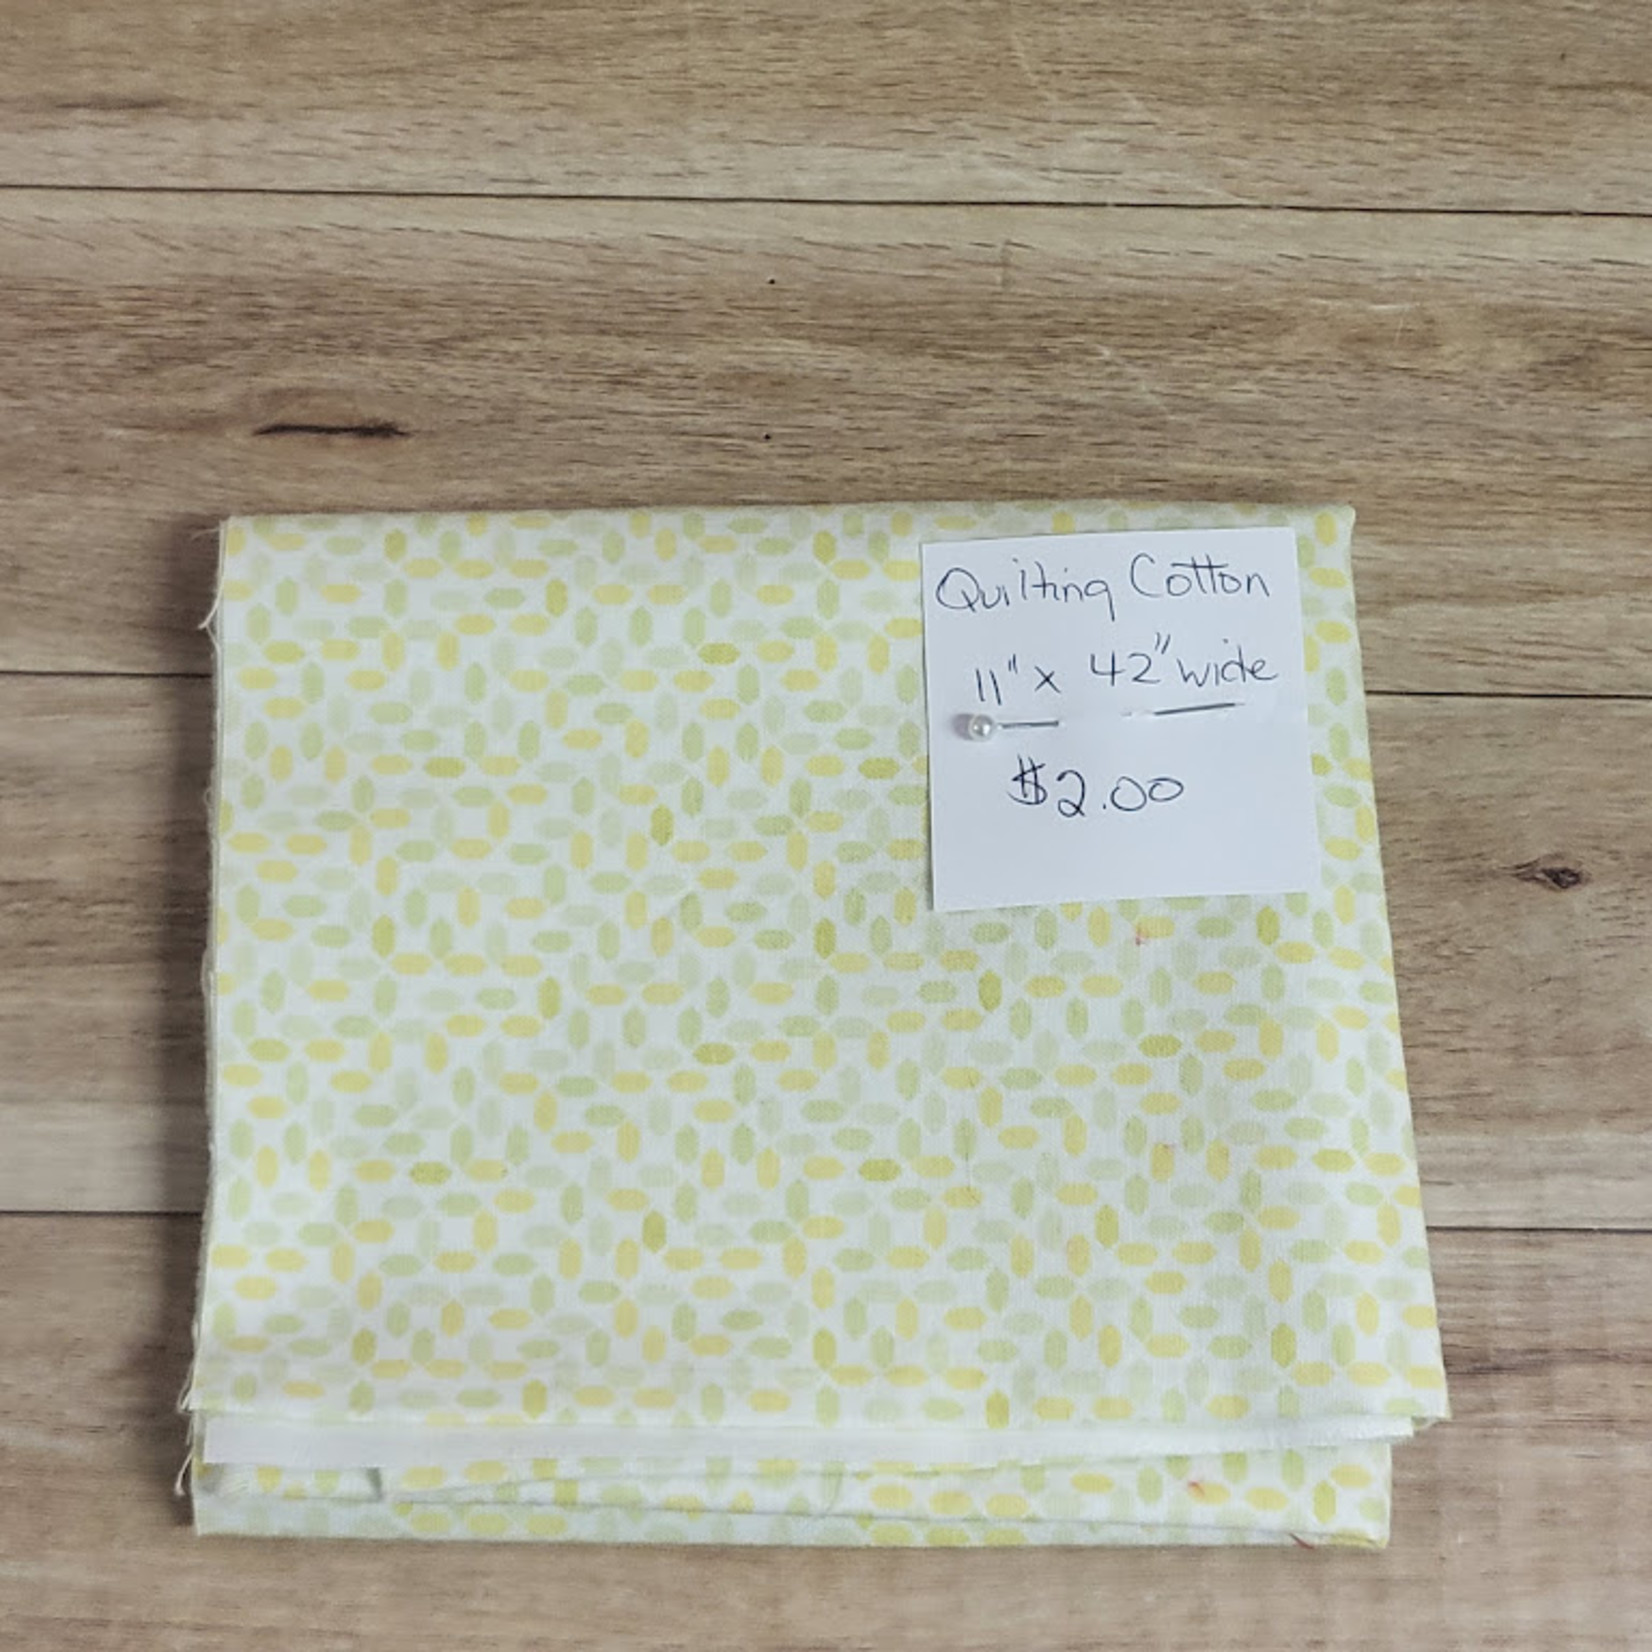 Quilting Cotton - 11" x 42" - Yellow